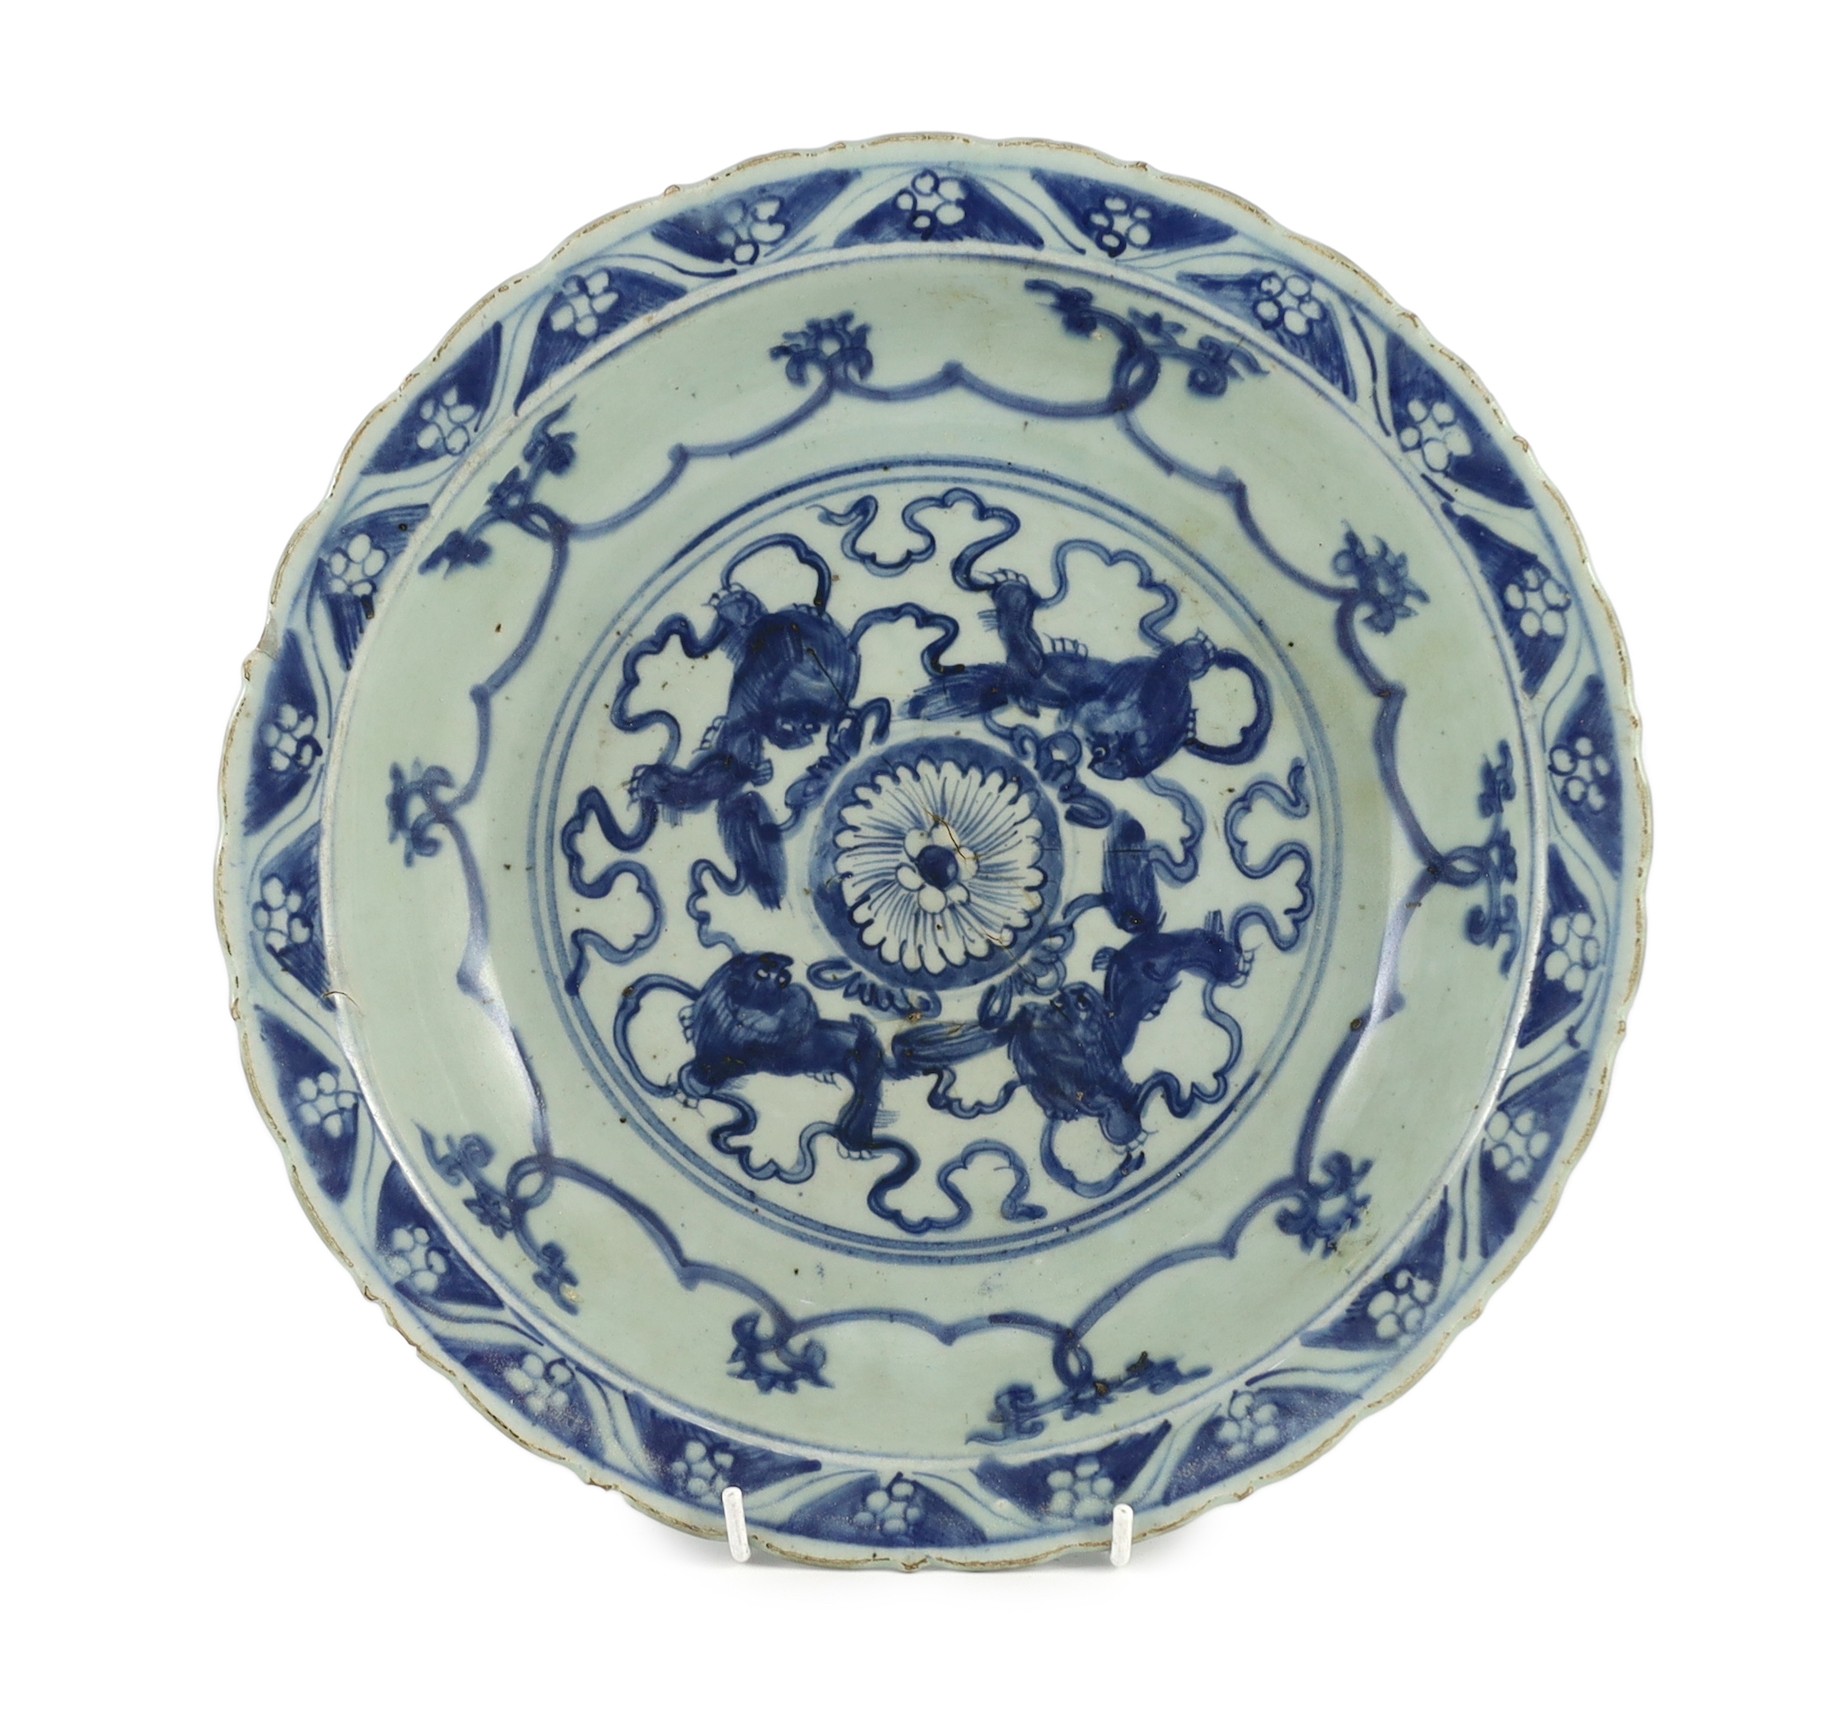 A Chinese Ming blue and white ‘lion’ dish, four character Ming mark, painted with four lions amid